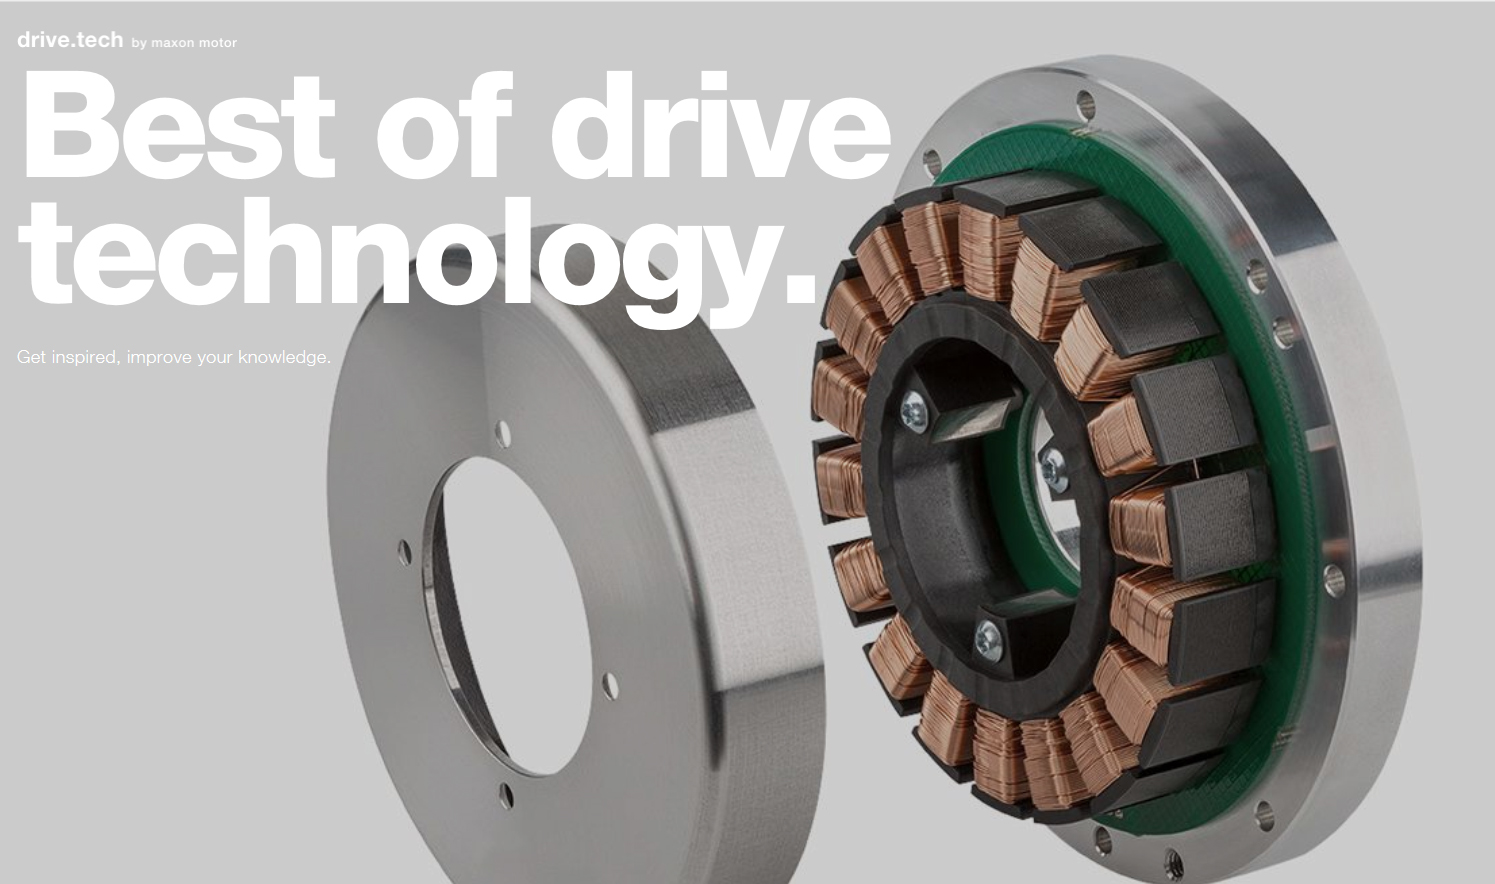 A look back on the innovative applications and technology maxon motor has been involved in throughout 2016